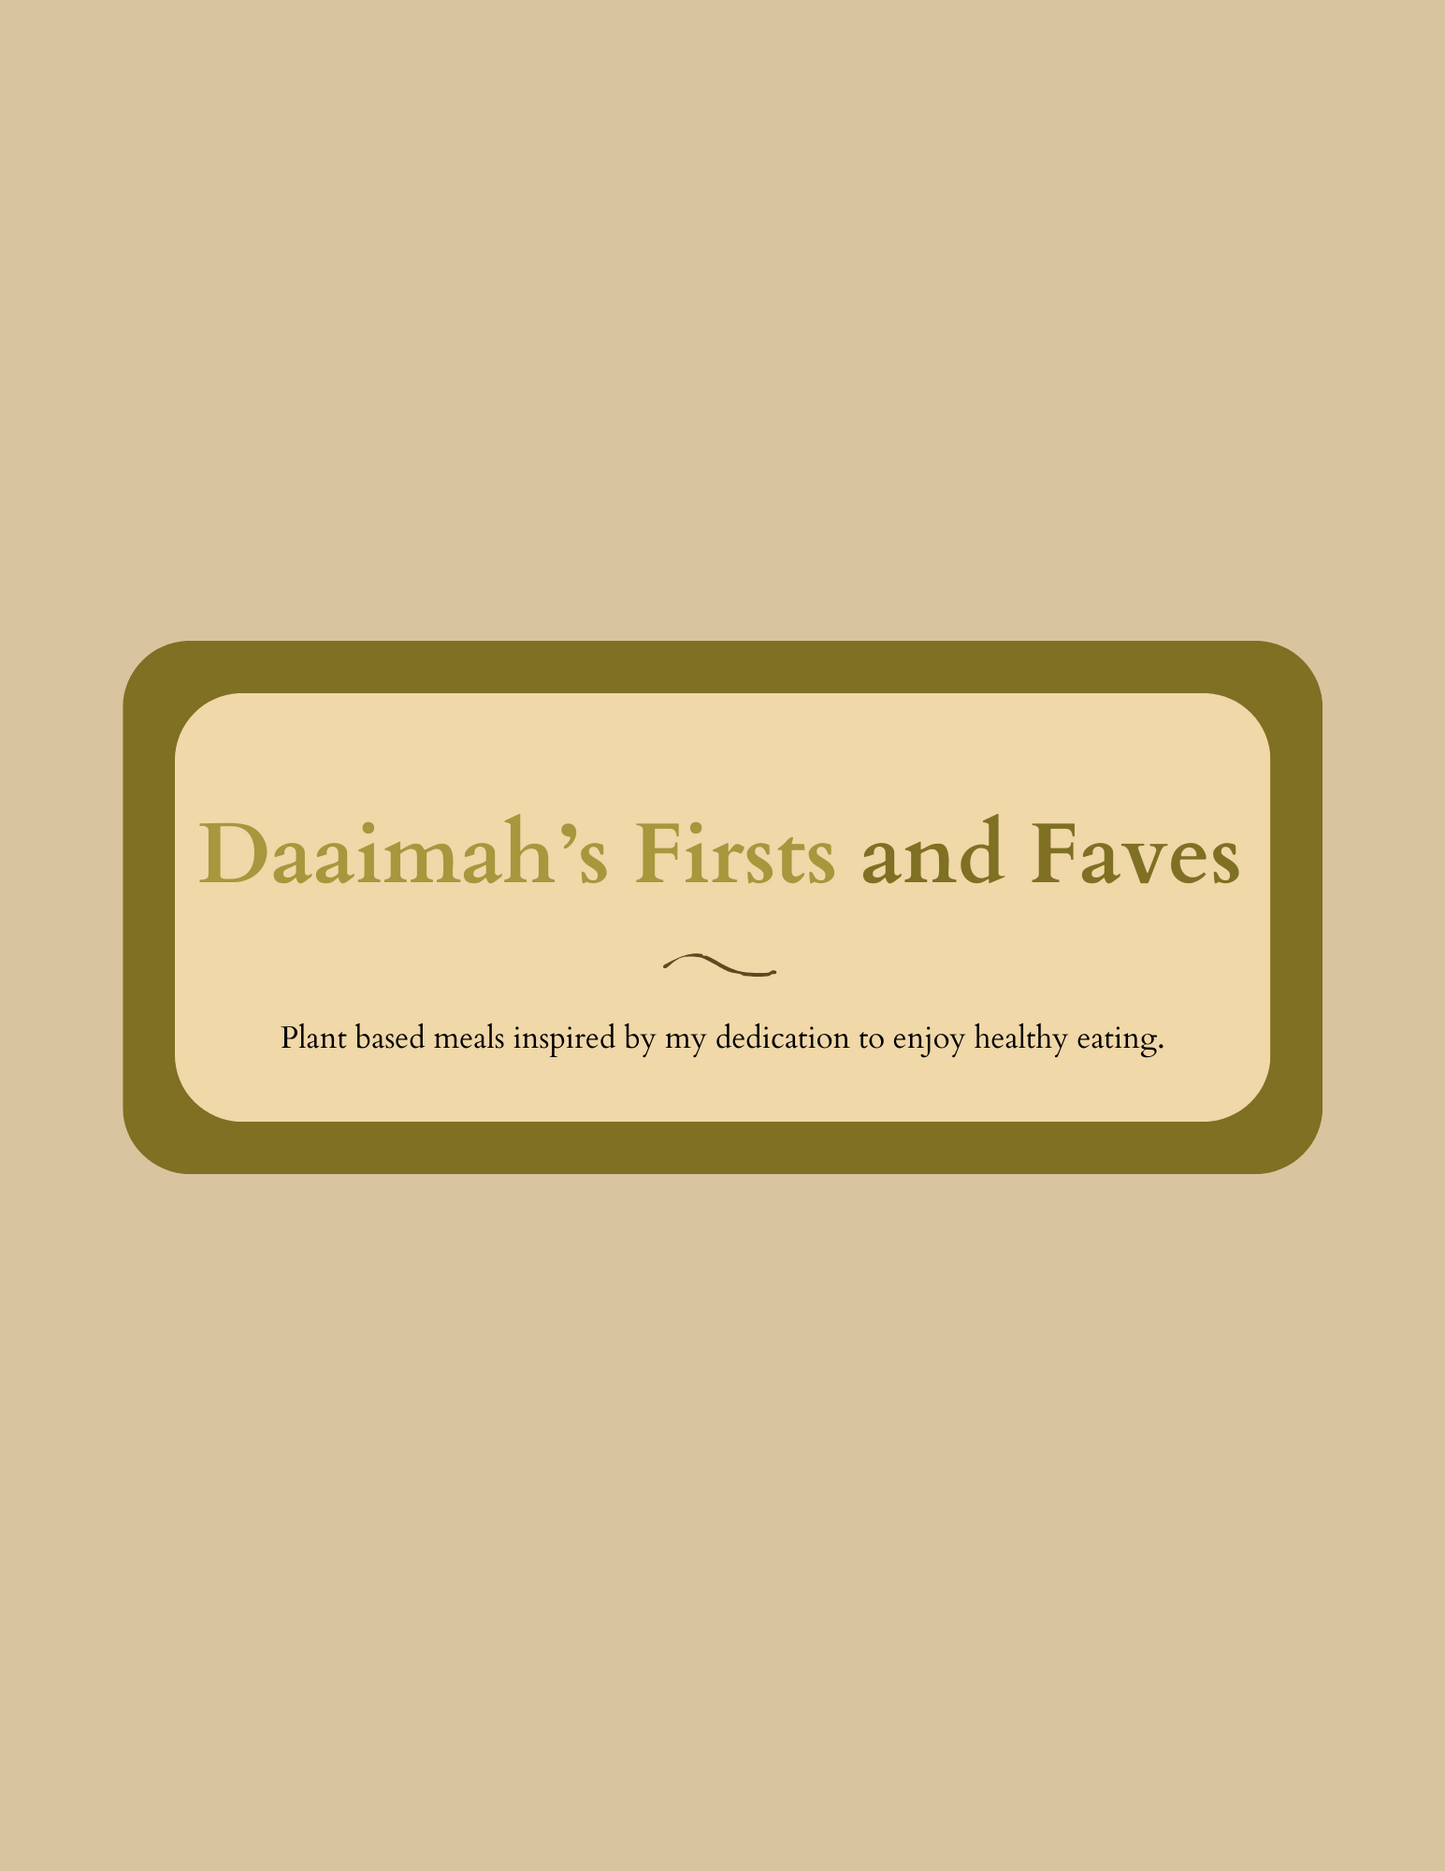 Daaimah's Firsts & Faves